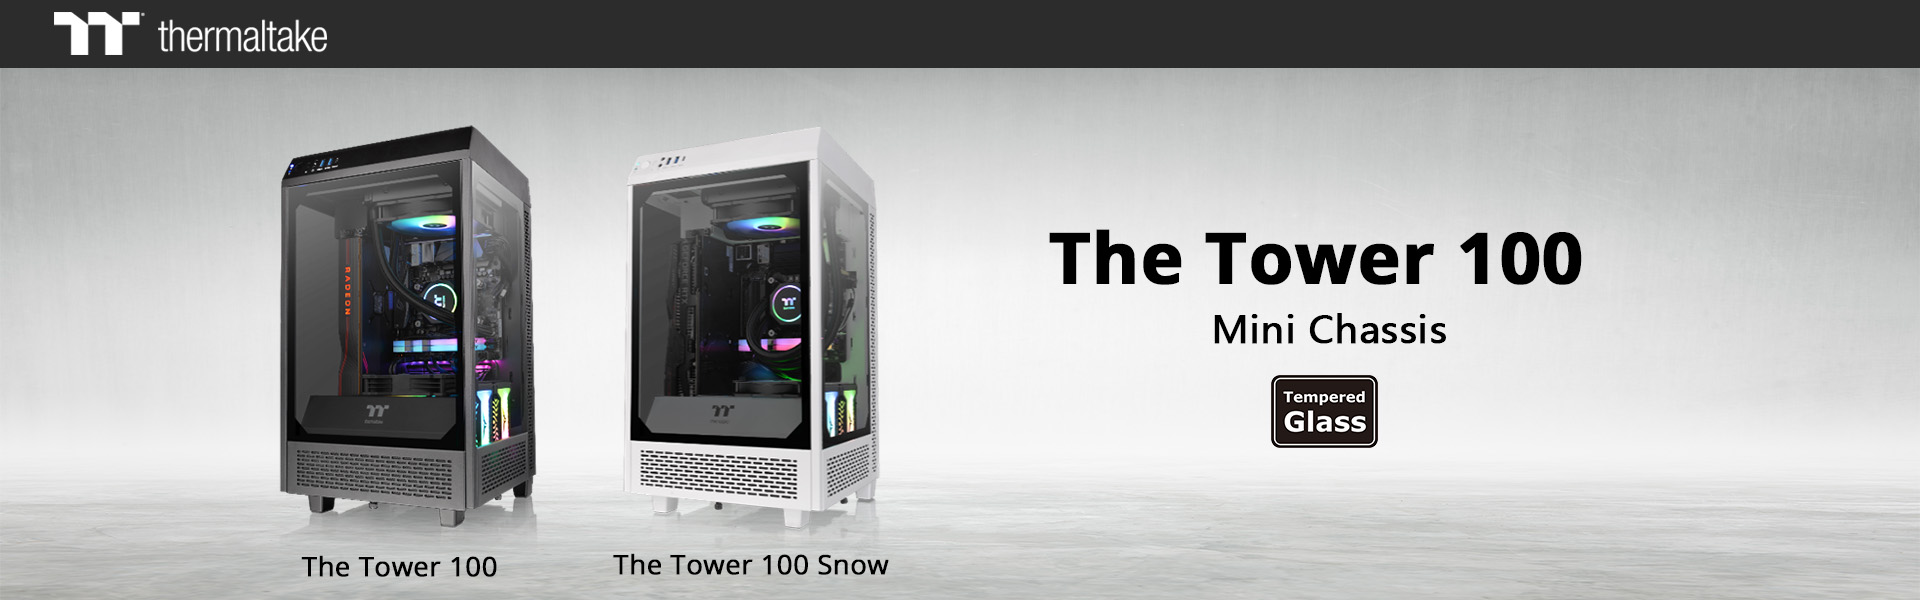 Thermaltake The Tower 100 Mini Chassis 2